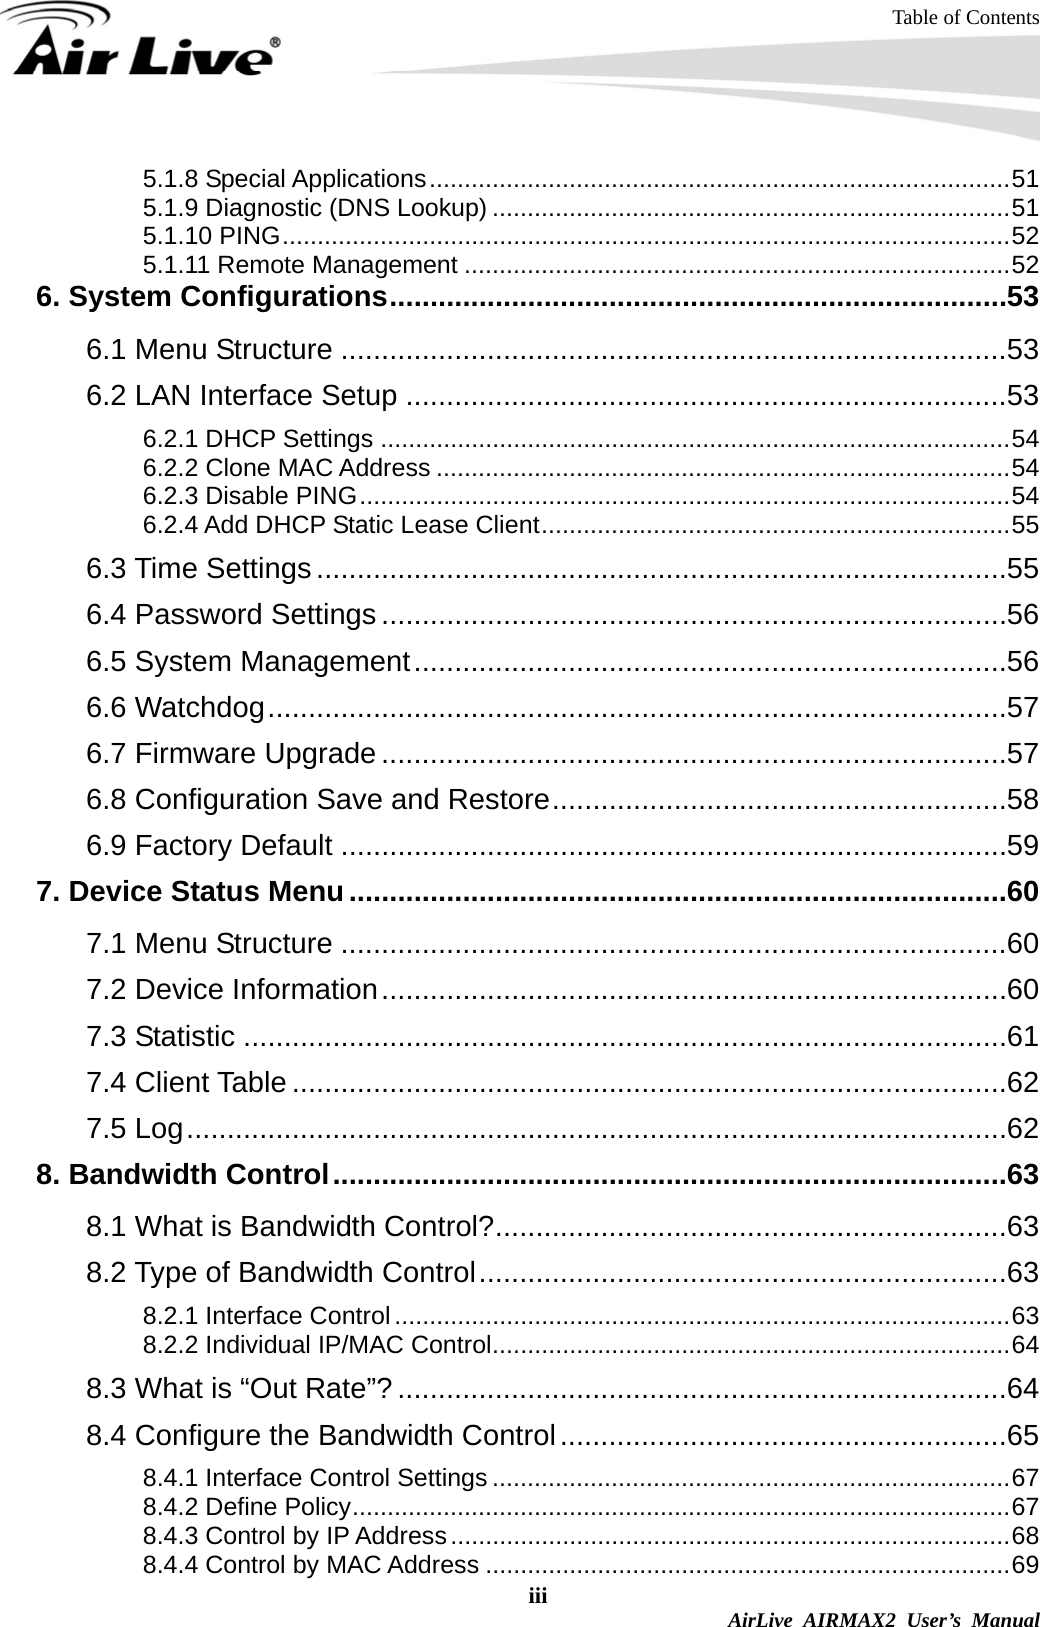 Table of Contents iii  AirLive AIRMAX2 User’s Manual 5.1.8 Special Applications...................................................................................51 5.1.9 Diagnostic (DNS Lookup) ..........................................................................51 5.1.10 PING........................................................................................................52 5.1.11 Remote Management ..............................................................................52 6. System Configurations............................................................................53 6.1 Menu Structure ..................................................................................53 6.2 LAN Interface Setup ..........................................................................53 6.2.1 DHCP Settings ..........................................................................................54 6.2.2 Clone MAC Address ..................................................................................54 6.2.3 Disable PING.............................................................................................54 6.2.4 Add DHCP Static Lease Client...................................................................55 6.3 Time Settings .....................................................................................55 6.4 Password Settings .............................................................................56 6.5 System Management.........................................................................56 6.6 Watchdog...........................................................................................57 6.7 Firmware Upgrade .............................................................................57 6.8 Configuration Save and Restore........................................................58 6.9 Factory Default ..................................................................................59 7. Device Status Menu.................................................................................60 7.1 Menu Structure ..................................................................................60 7.2 Device Information.............................................................................60 7.3 Statistic ..............................................................................................61 7.4 Client Table ........................................................................................62 7.5 Log.....................................................................................................62 8. Bandwidth Control...................................................................................63 8.1 What is Bandwidth Control?...............................................................63 8.2 Type of Bandwidth Control.................................................................63 8.2.1 Interface Control........................................................................................63 8.2.2 Individual IP/MAC Control..........................................................................64 8.3 What is “Out Rate”? ...........................................................................64 8.4 Configure the Bandwidth Control.......................................................65 8.4.1 Interface Control Settings ..........................................................................67 8.4.2 Define Policy..............................................................................................67 8.4.3 Control by IP Address................................................................................68 8.4.4 Control by MAC Address ...........................................................................69 